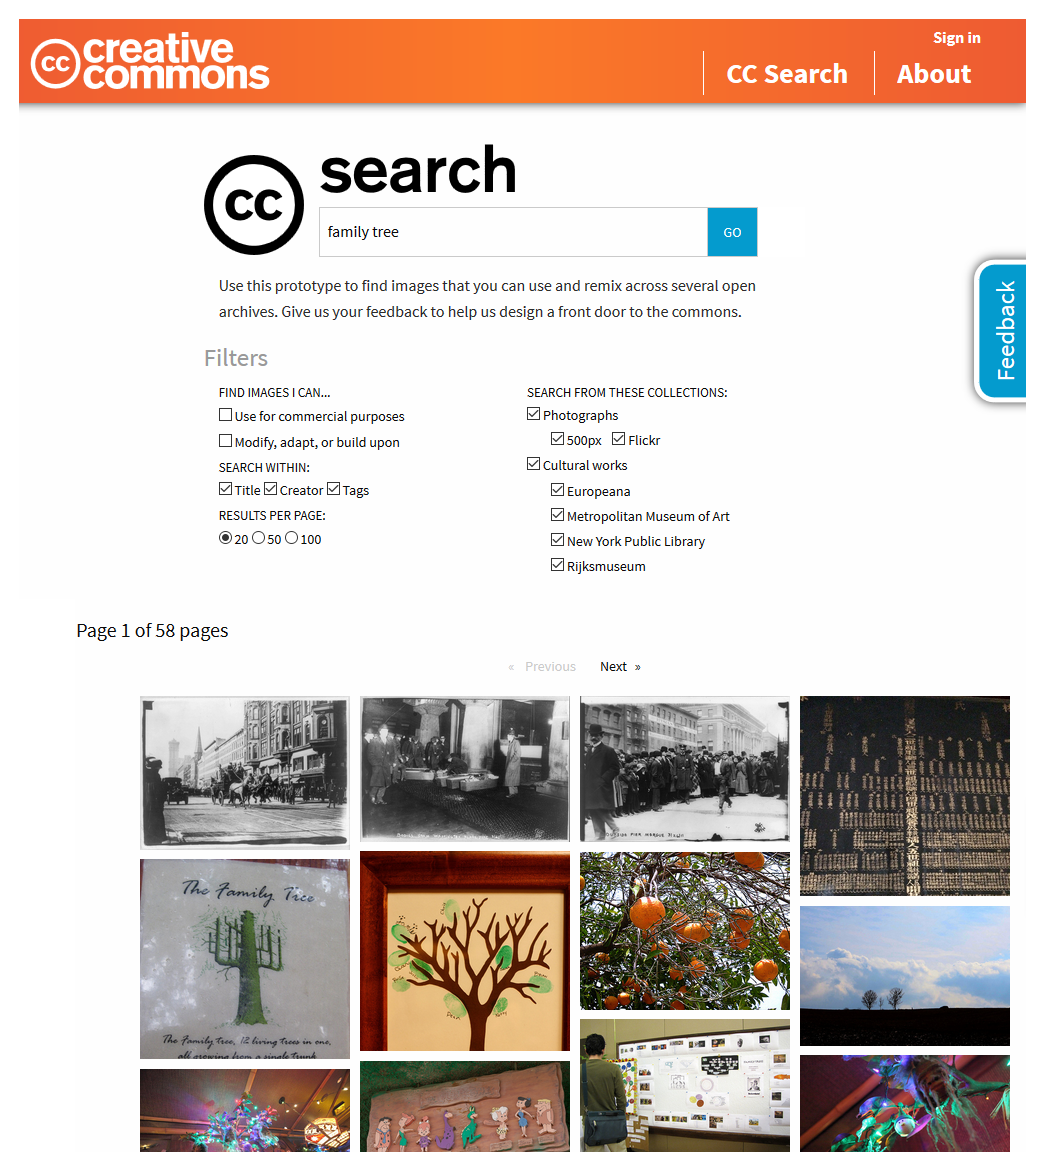 C search creative commons